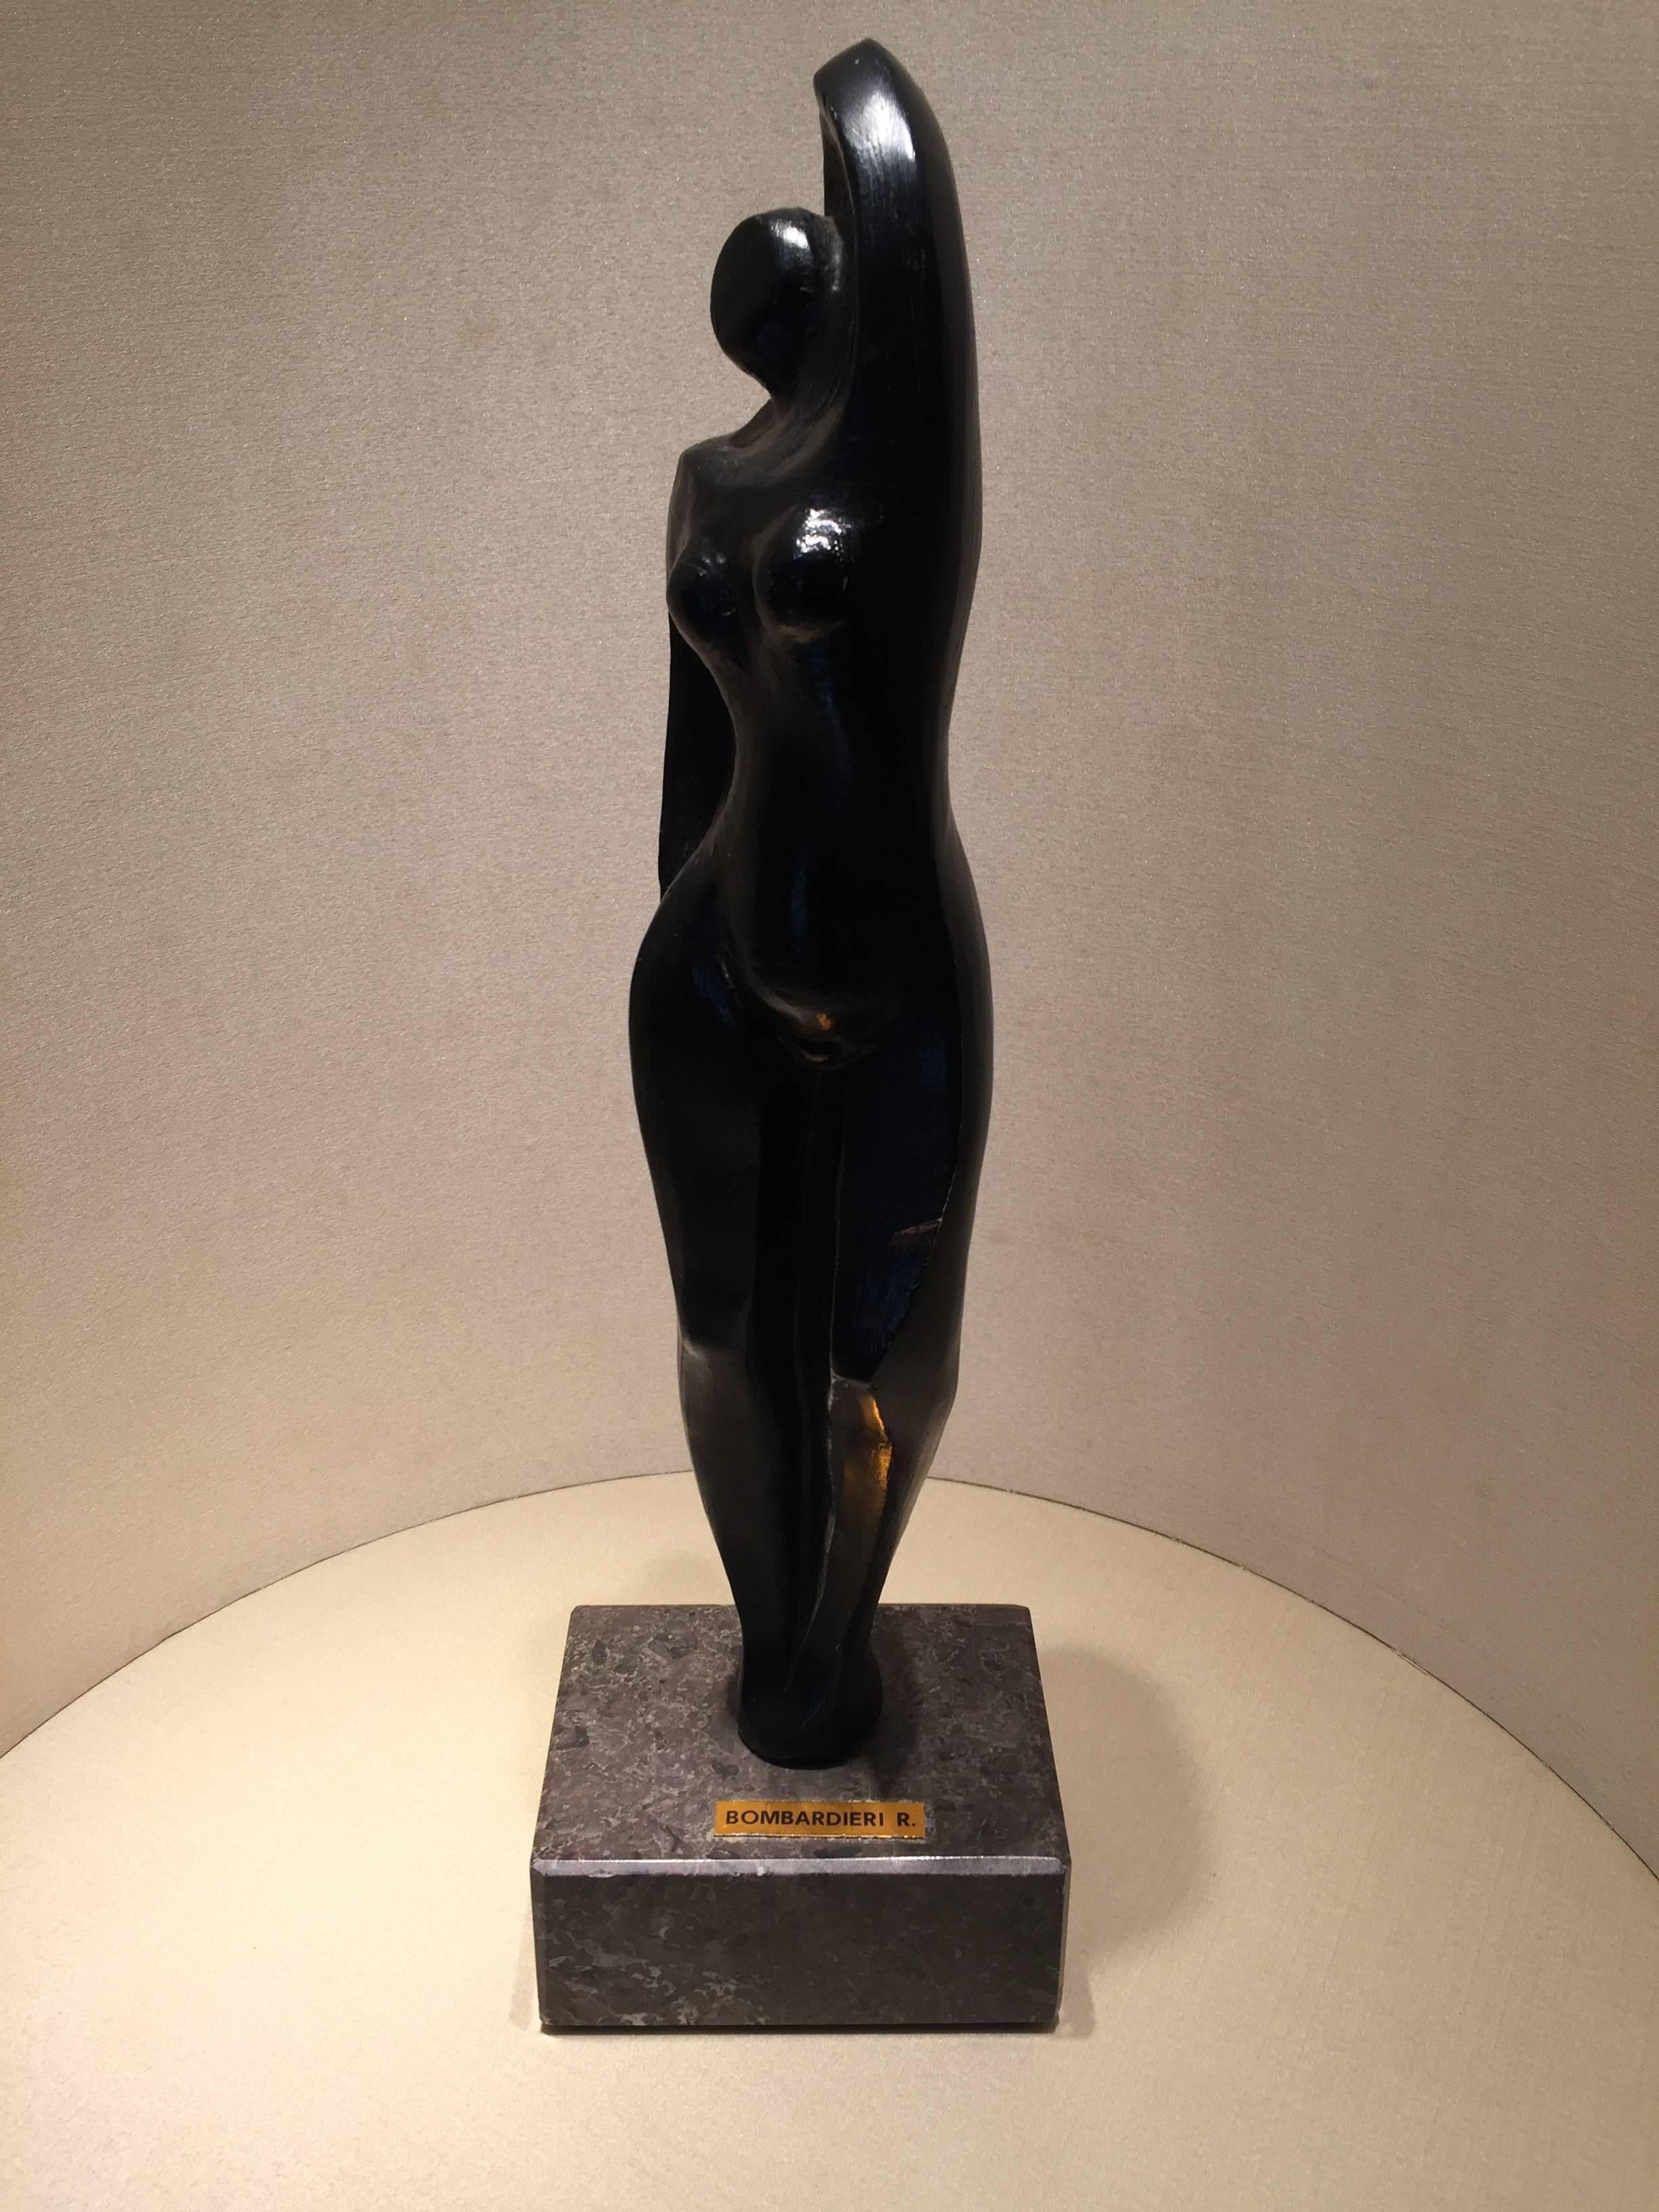 A beautiful nude of a female figure, cast bronze on a marble base.
Remo Bombardieri is born in Brescia (Italy) in 1936 where he lives and work.
His sculptures are in many European private collection and he made big monuments in Germany and Italy.